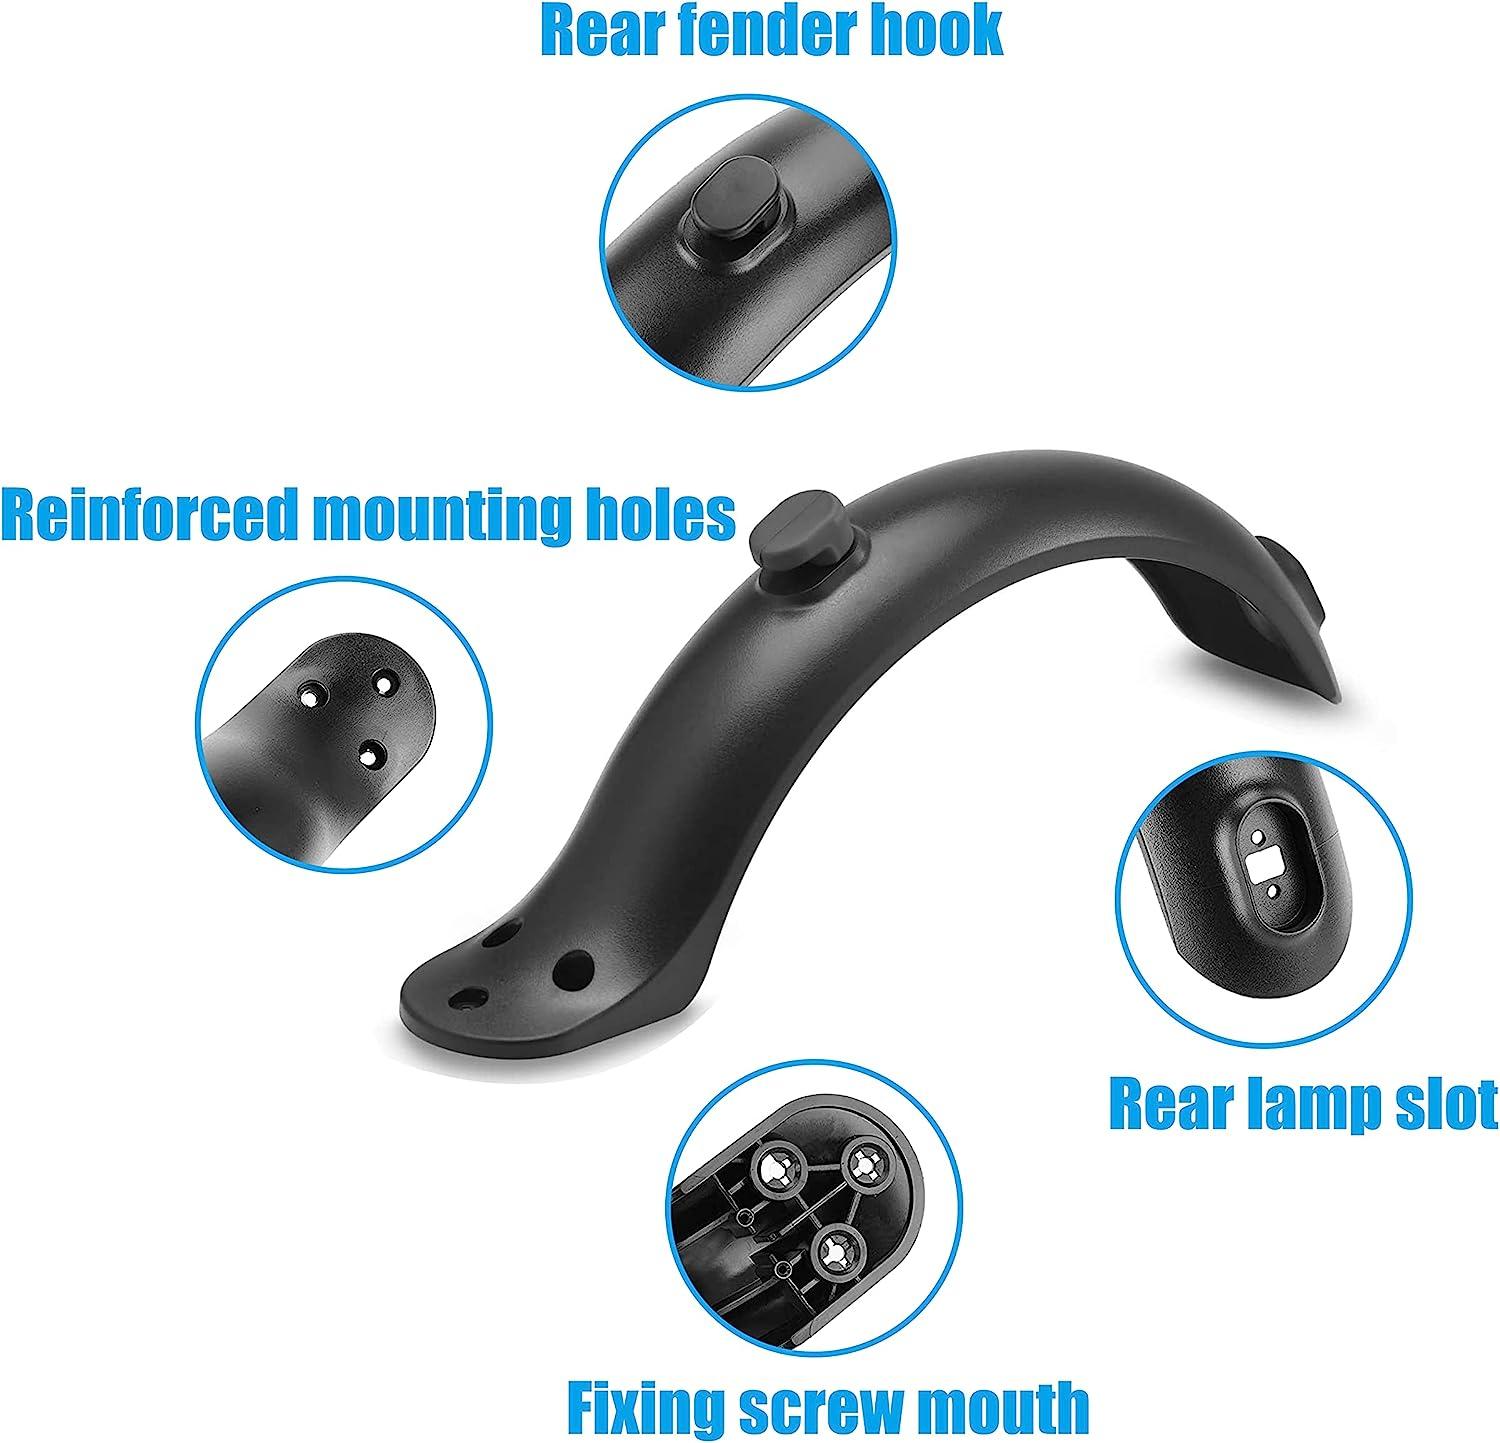 Yungeln Rear Mudguard Scooter Fender Bracket Scooter Replacement Accessory  Support Mudguard Bracket Fender Compatible for Xiaomi M365/Pro 1S Scooter  Black With brake lights